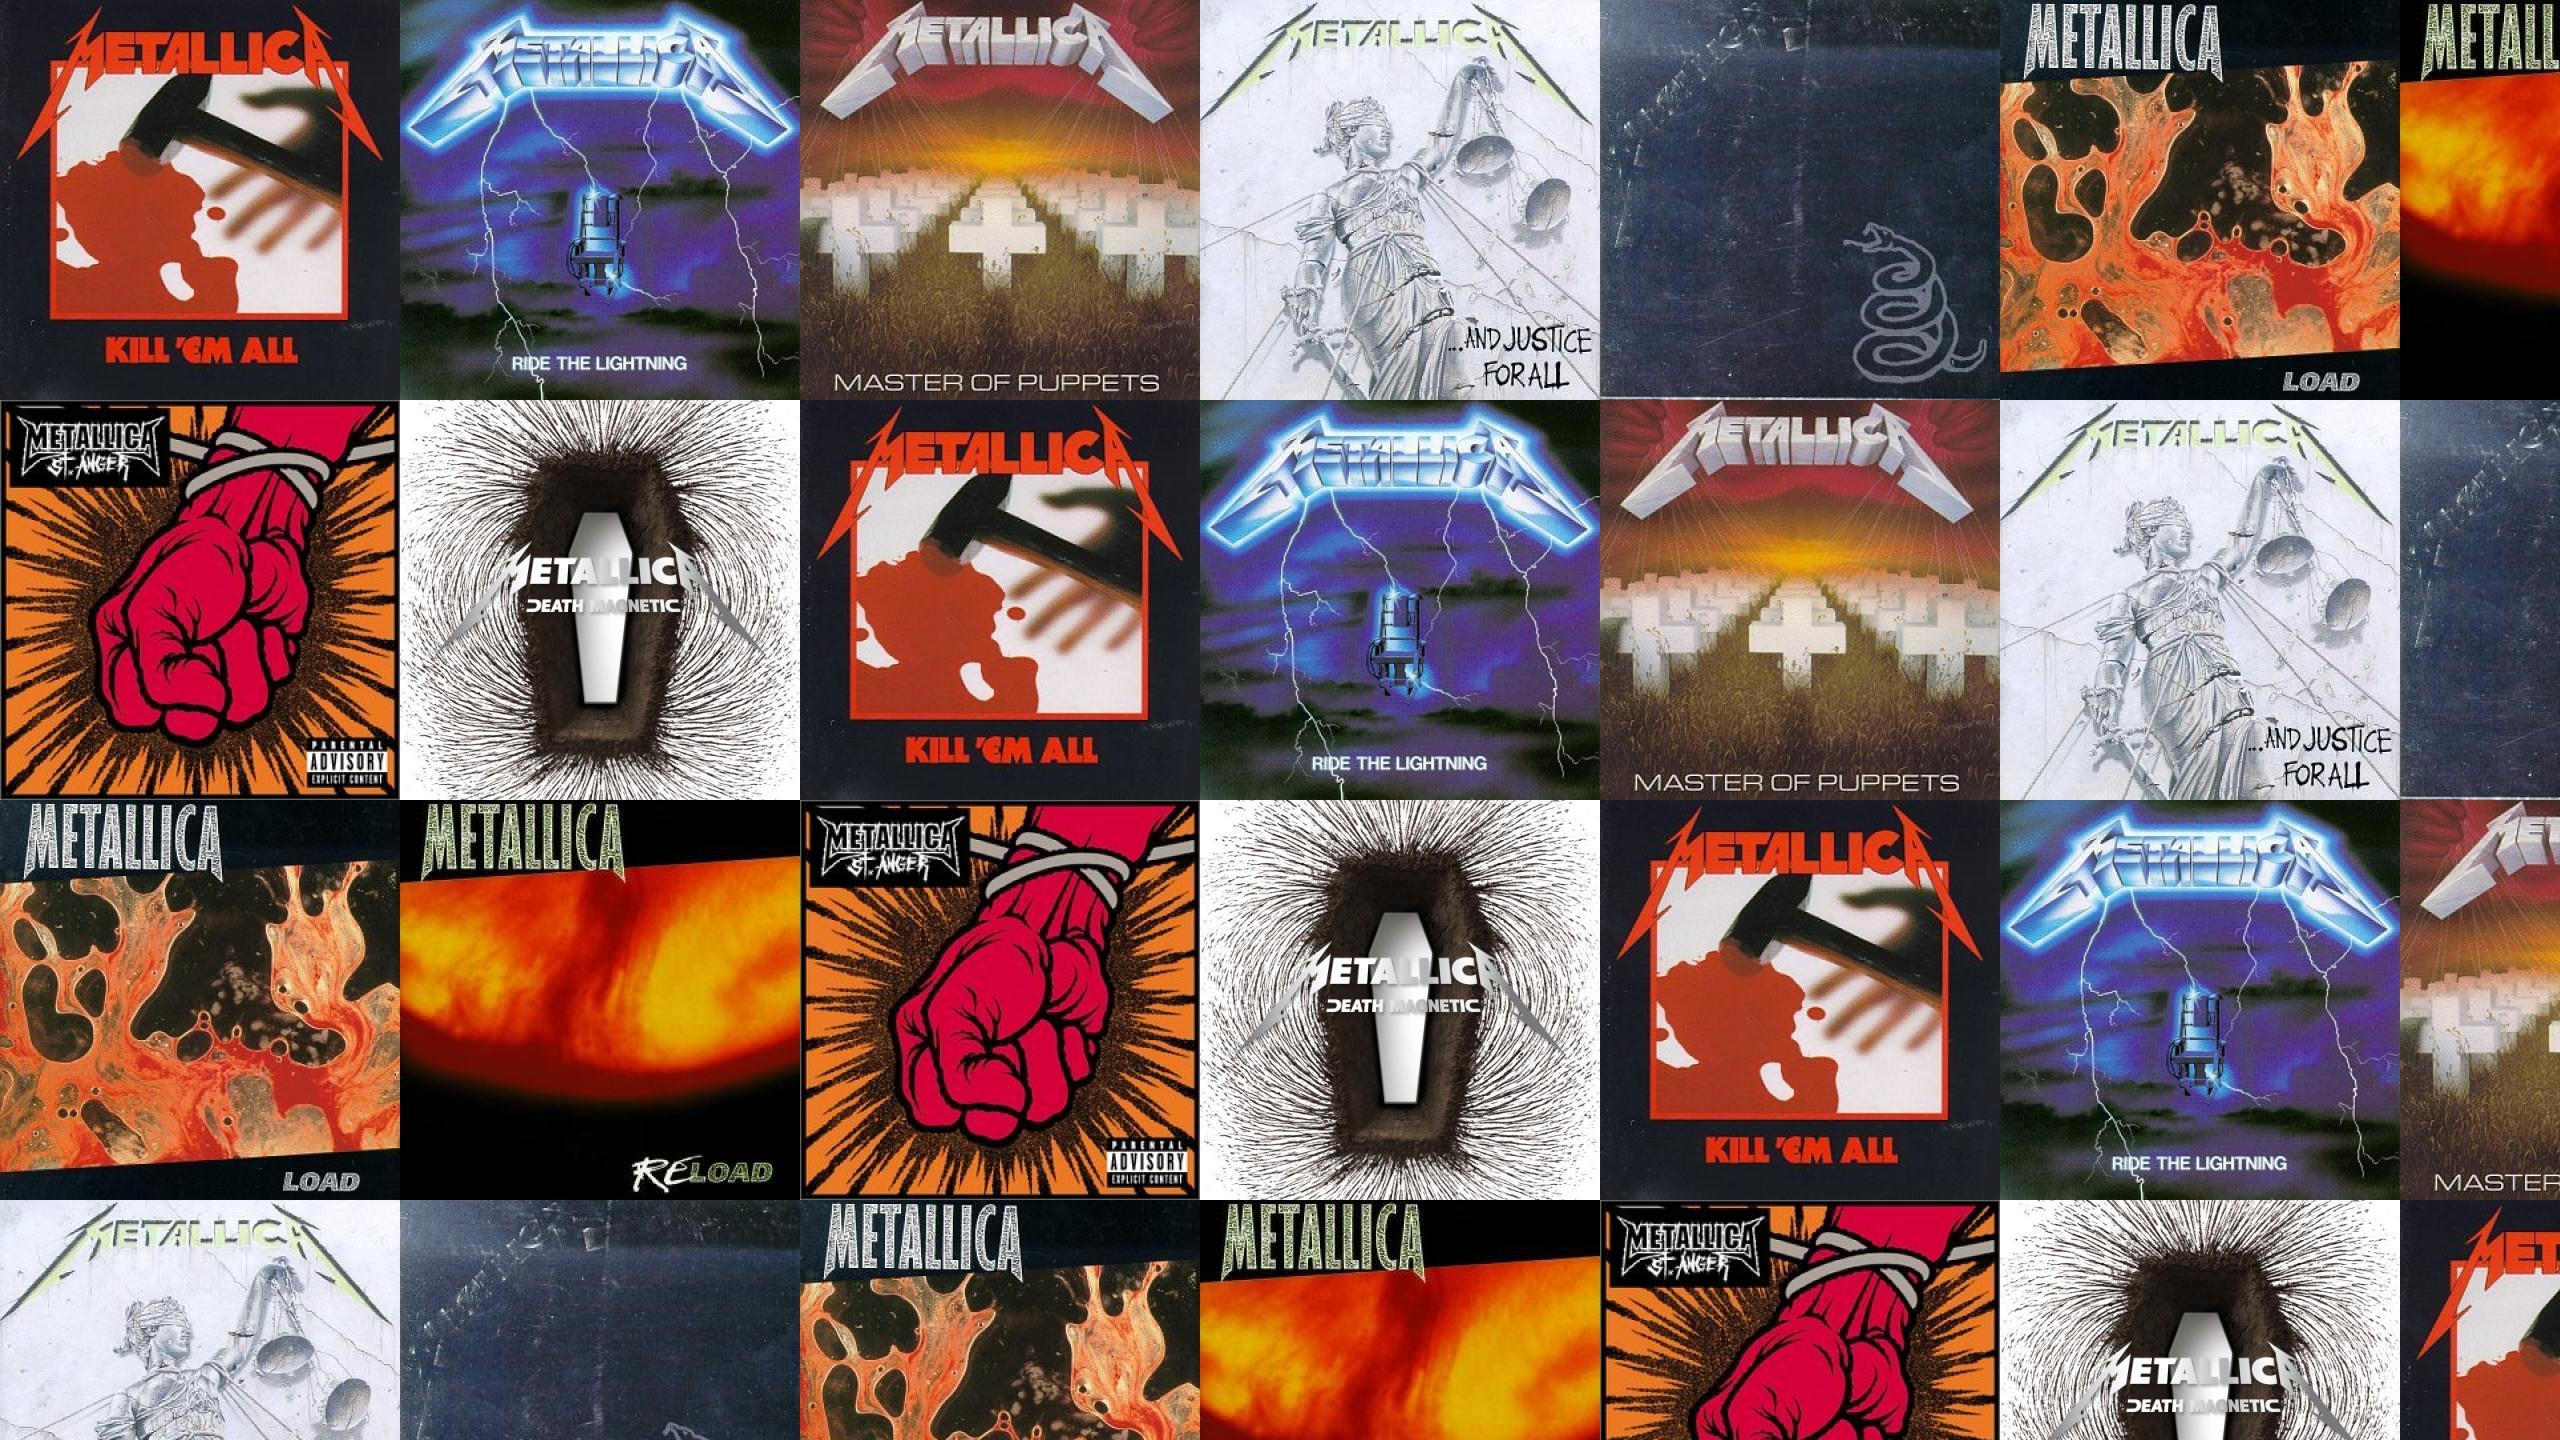 A beginners guide to Metallica in five essential albums